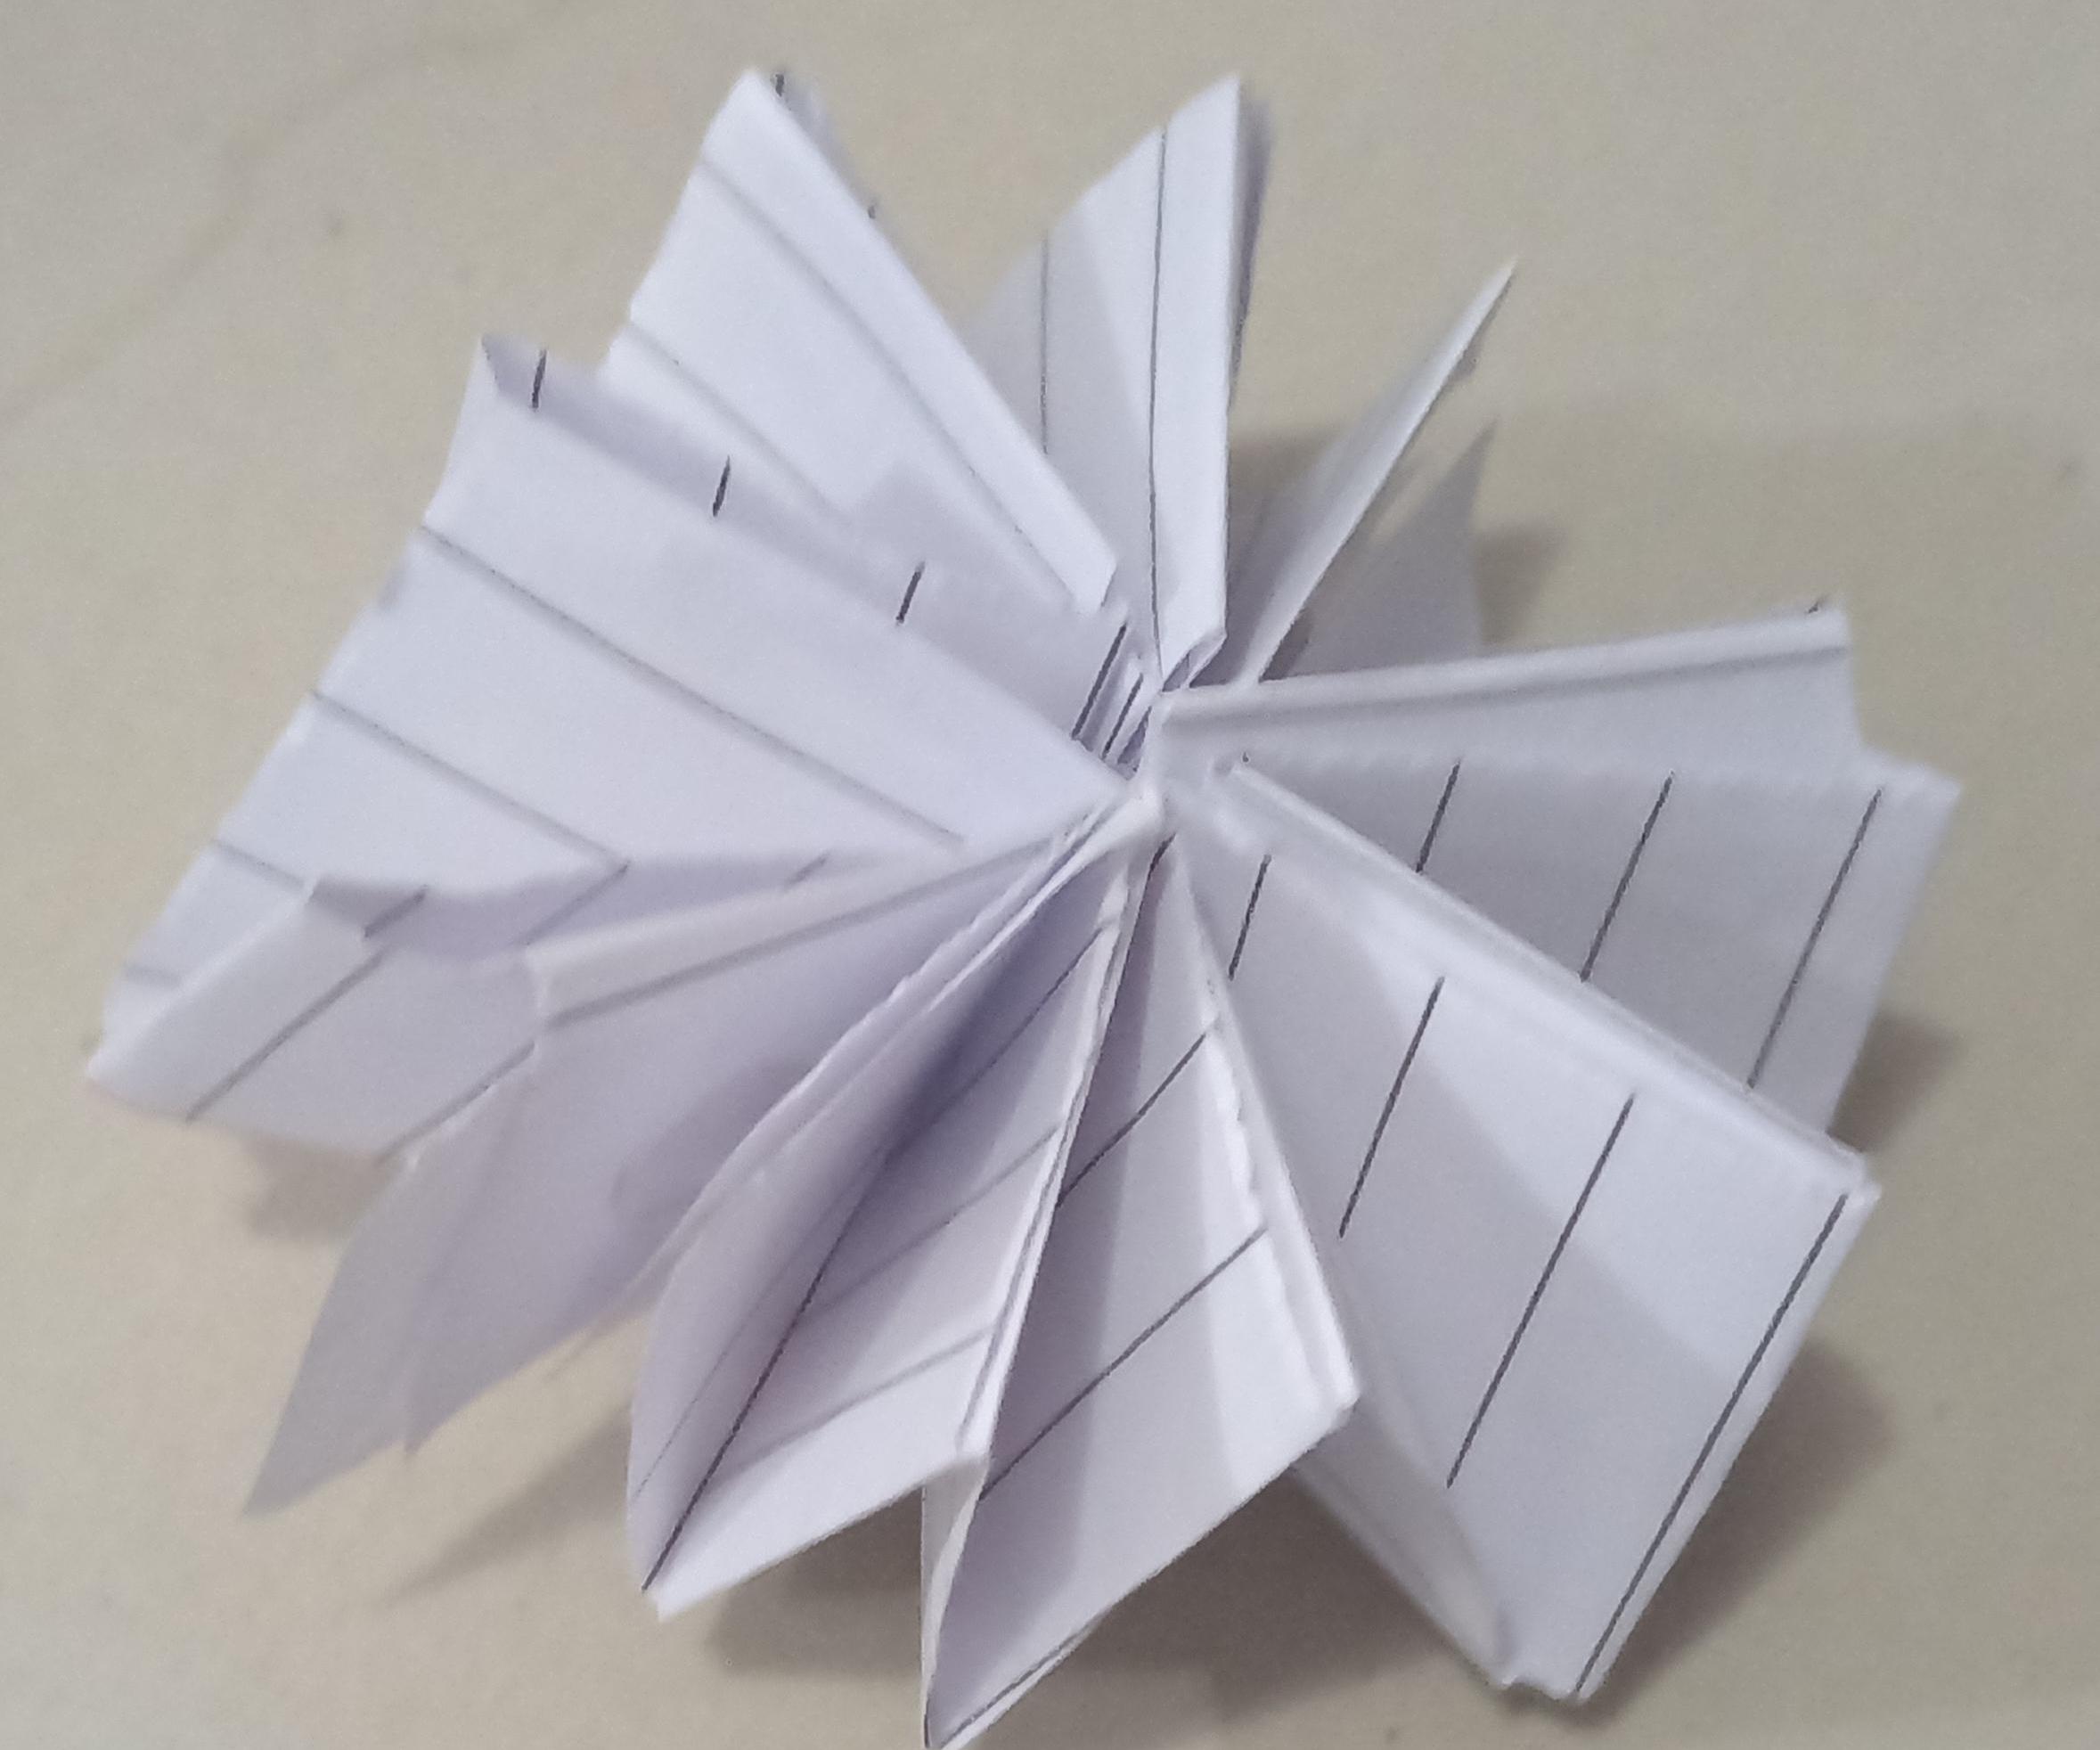 How to Make Paper Jewelry?